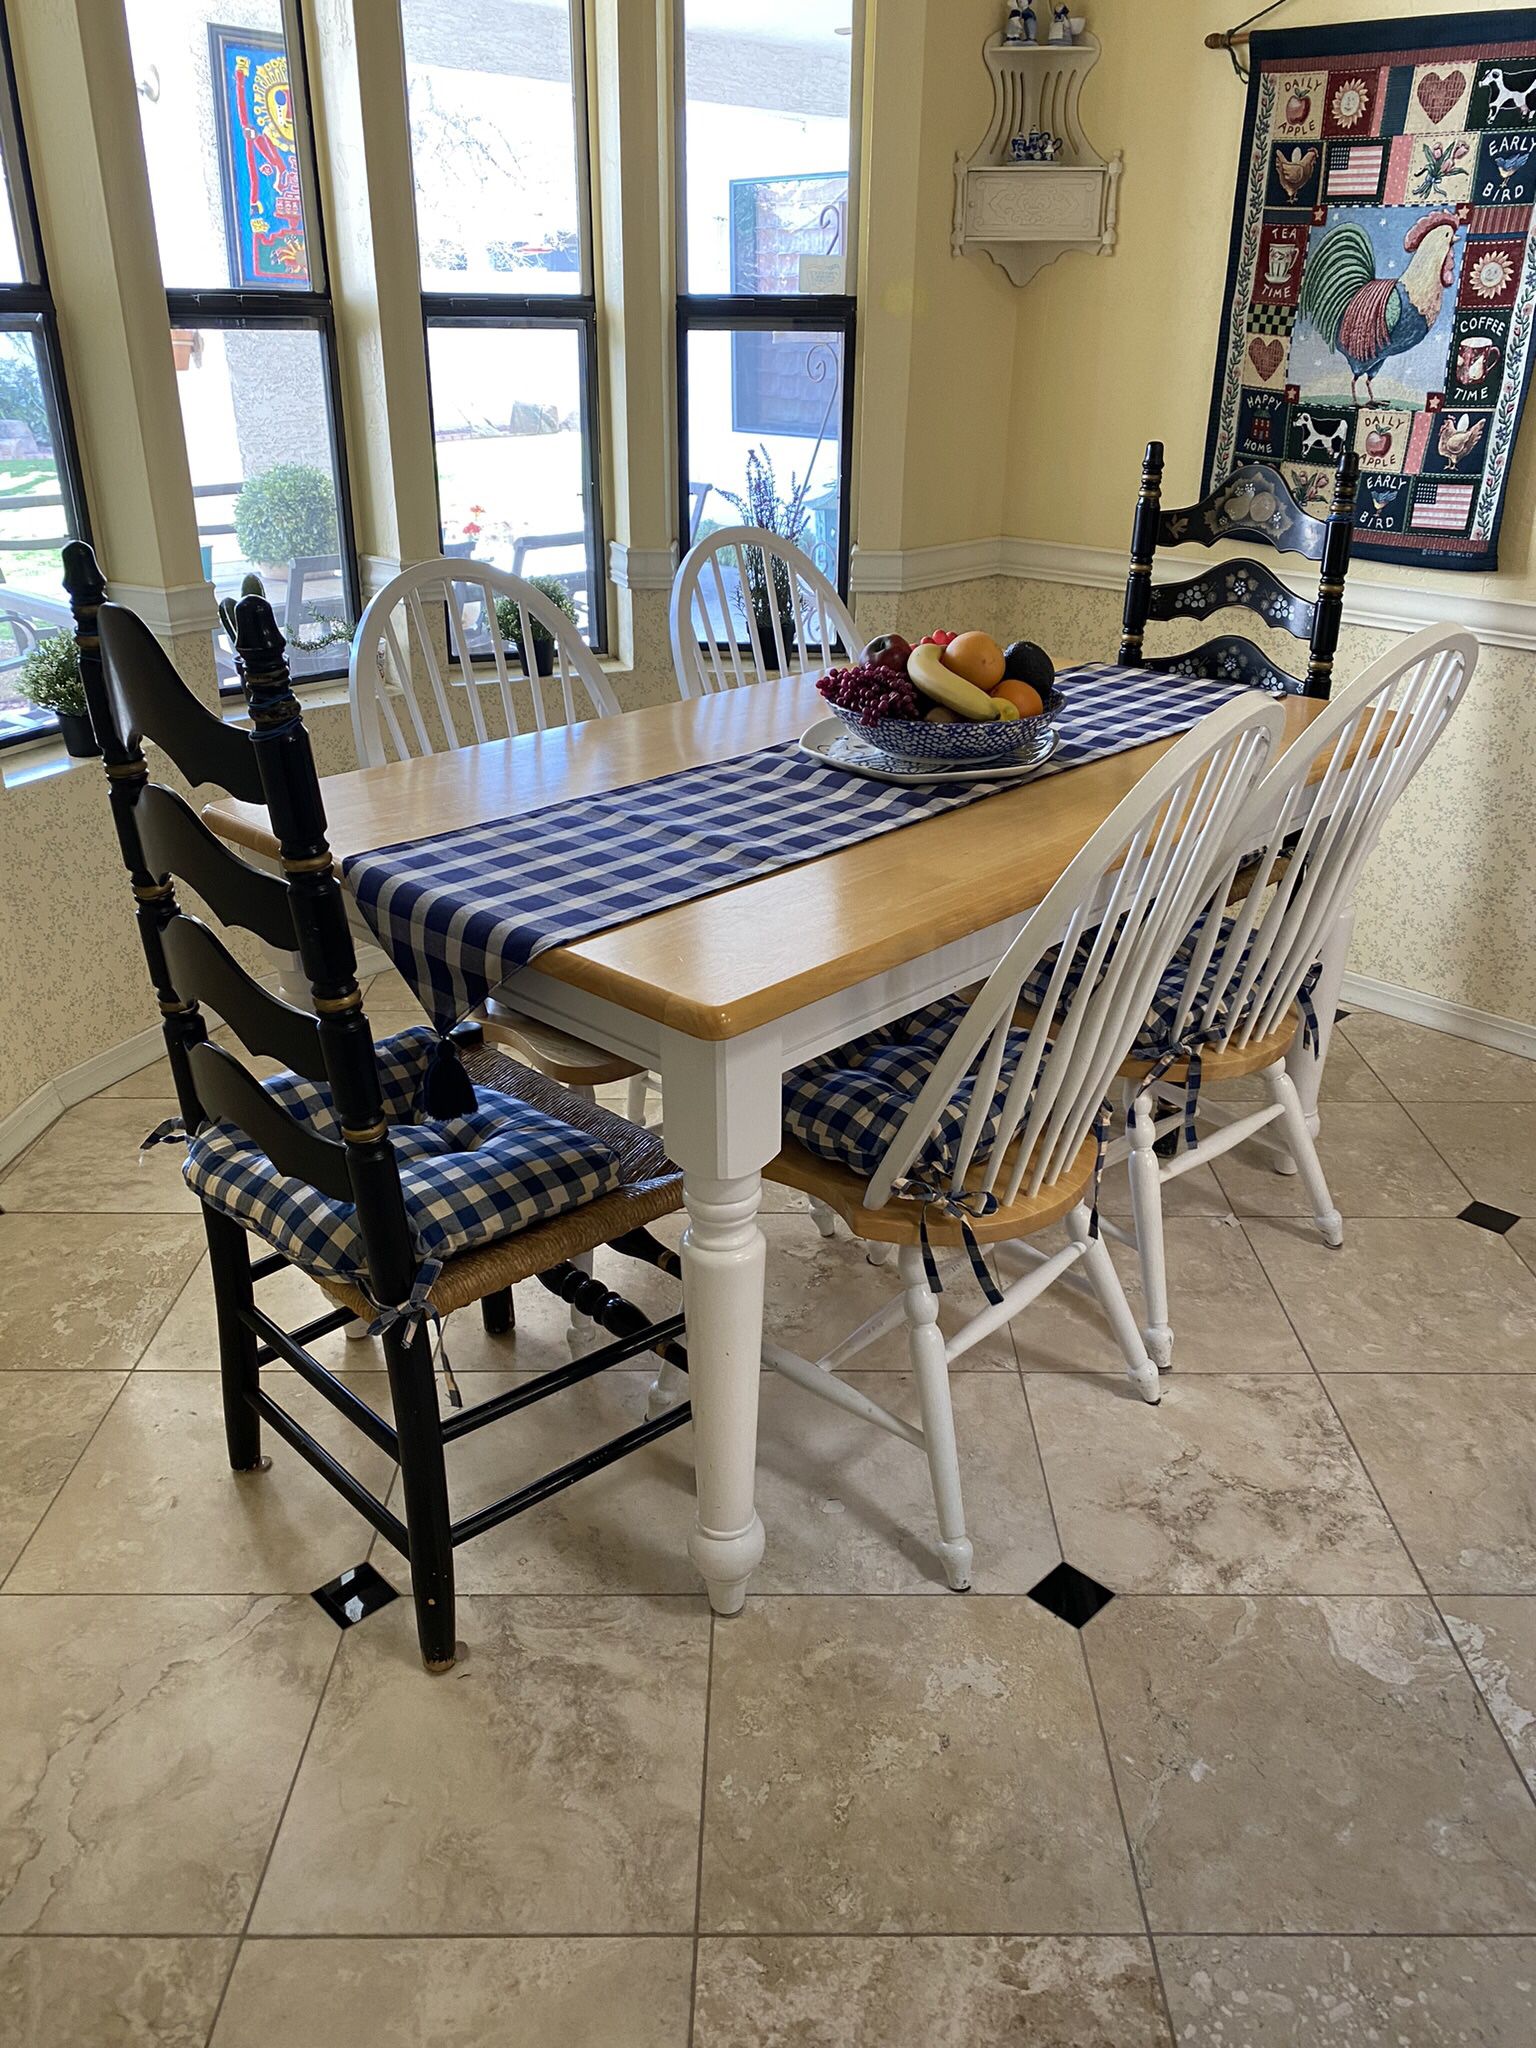 Kitchen Table with Four Chairs